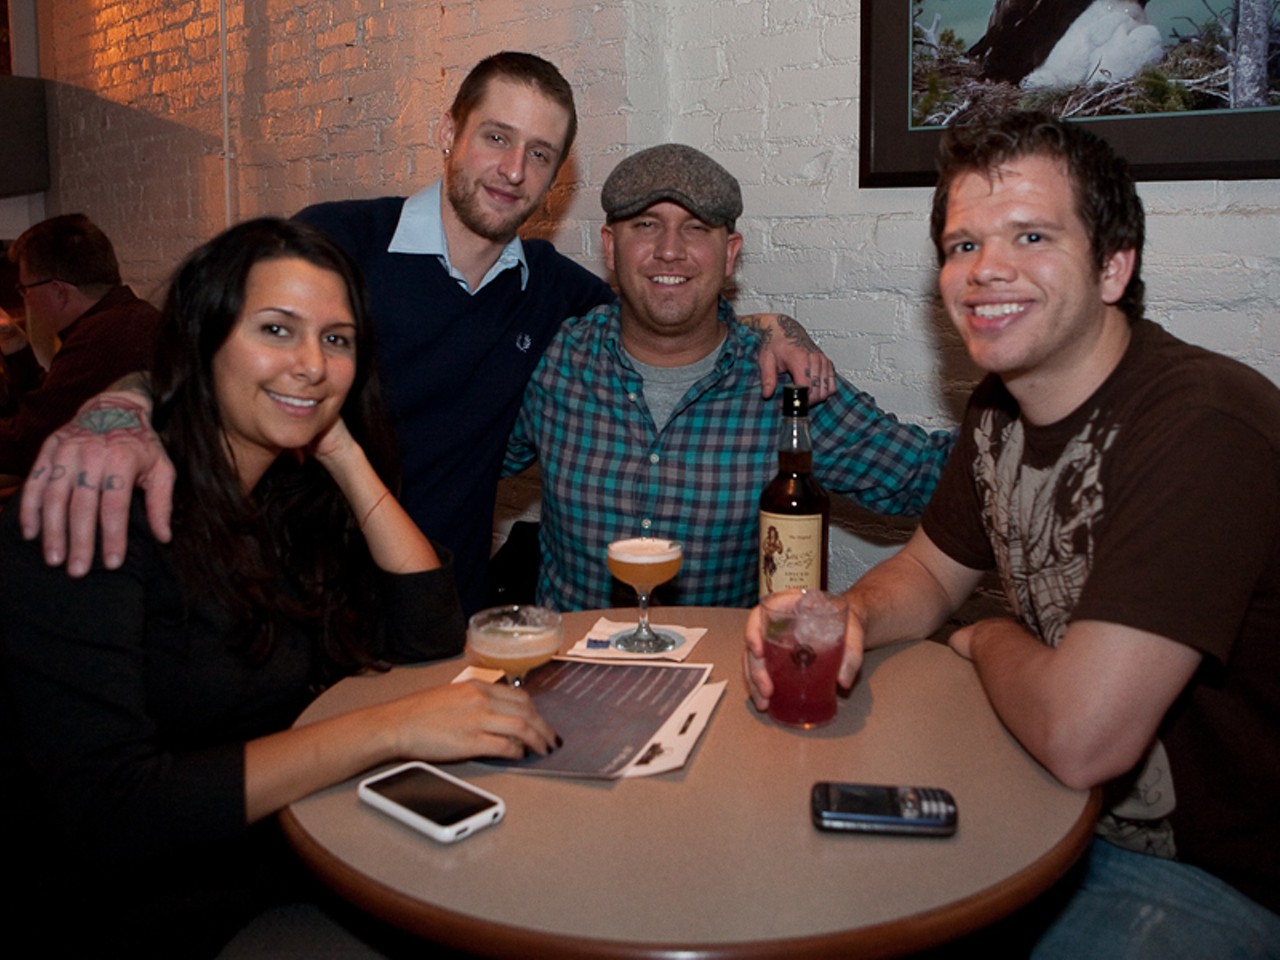 Mixologist Lucas Ramsey (center left) of Eclipse restaurant poses with friends.